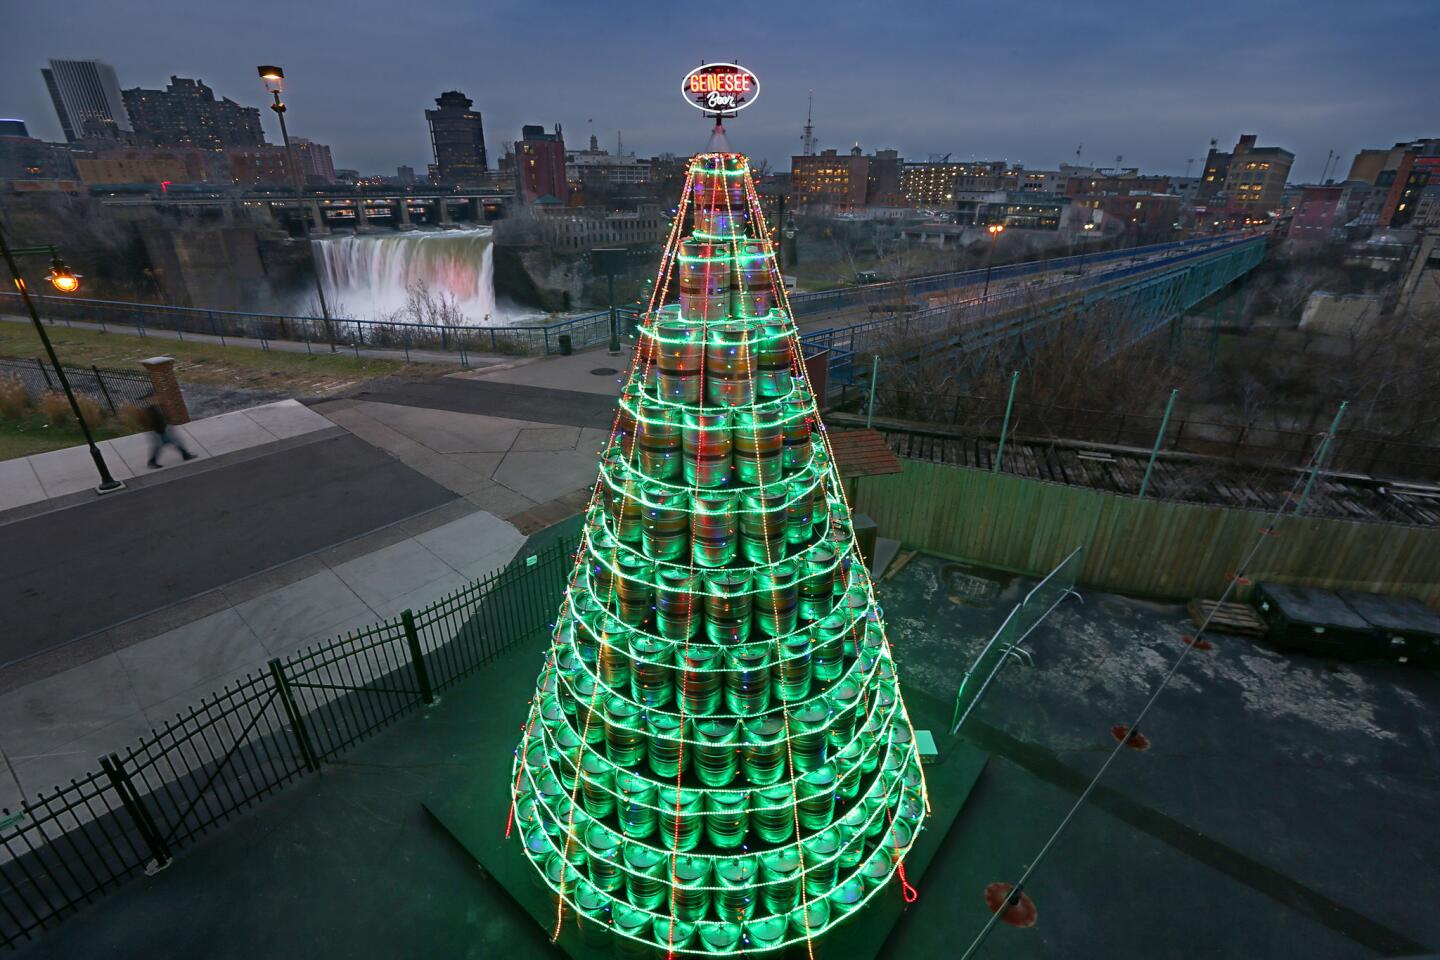 OK, not everyone may appreciate this Christmas tree made of 400 empty beer kegs, but it certainly is novel. The lights are on and glowing green on the 26-foot-high tree constructed outside the Genesee Brew House in downtown Rochester, N.Y. This year's creation tops last year's tree by 2 feet and 100 kegs.